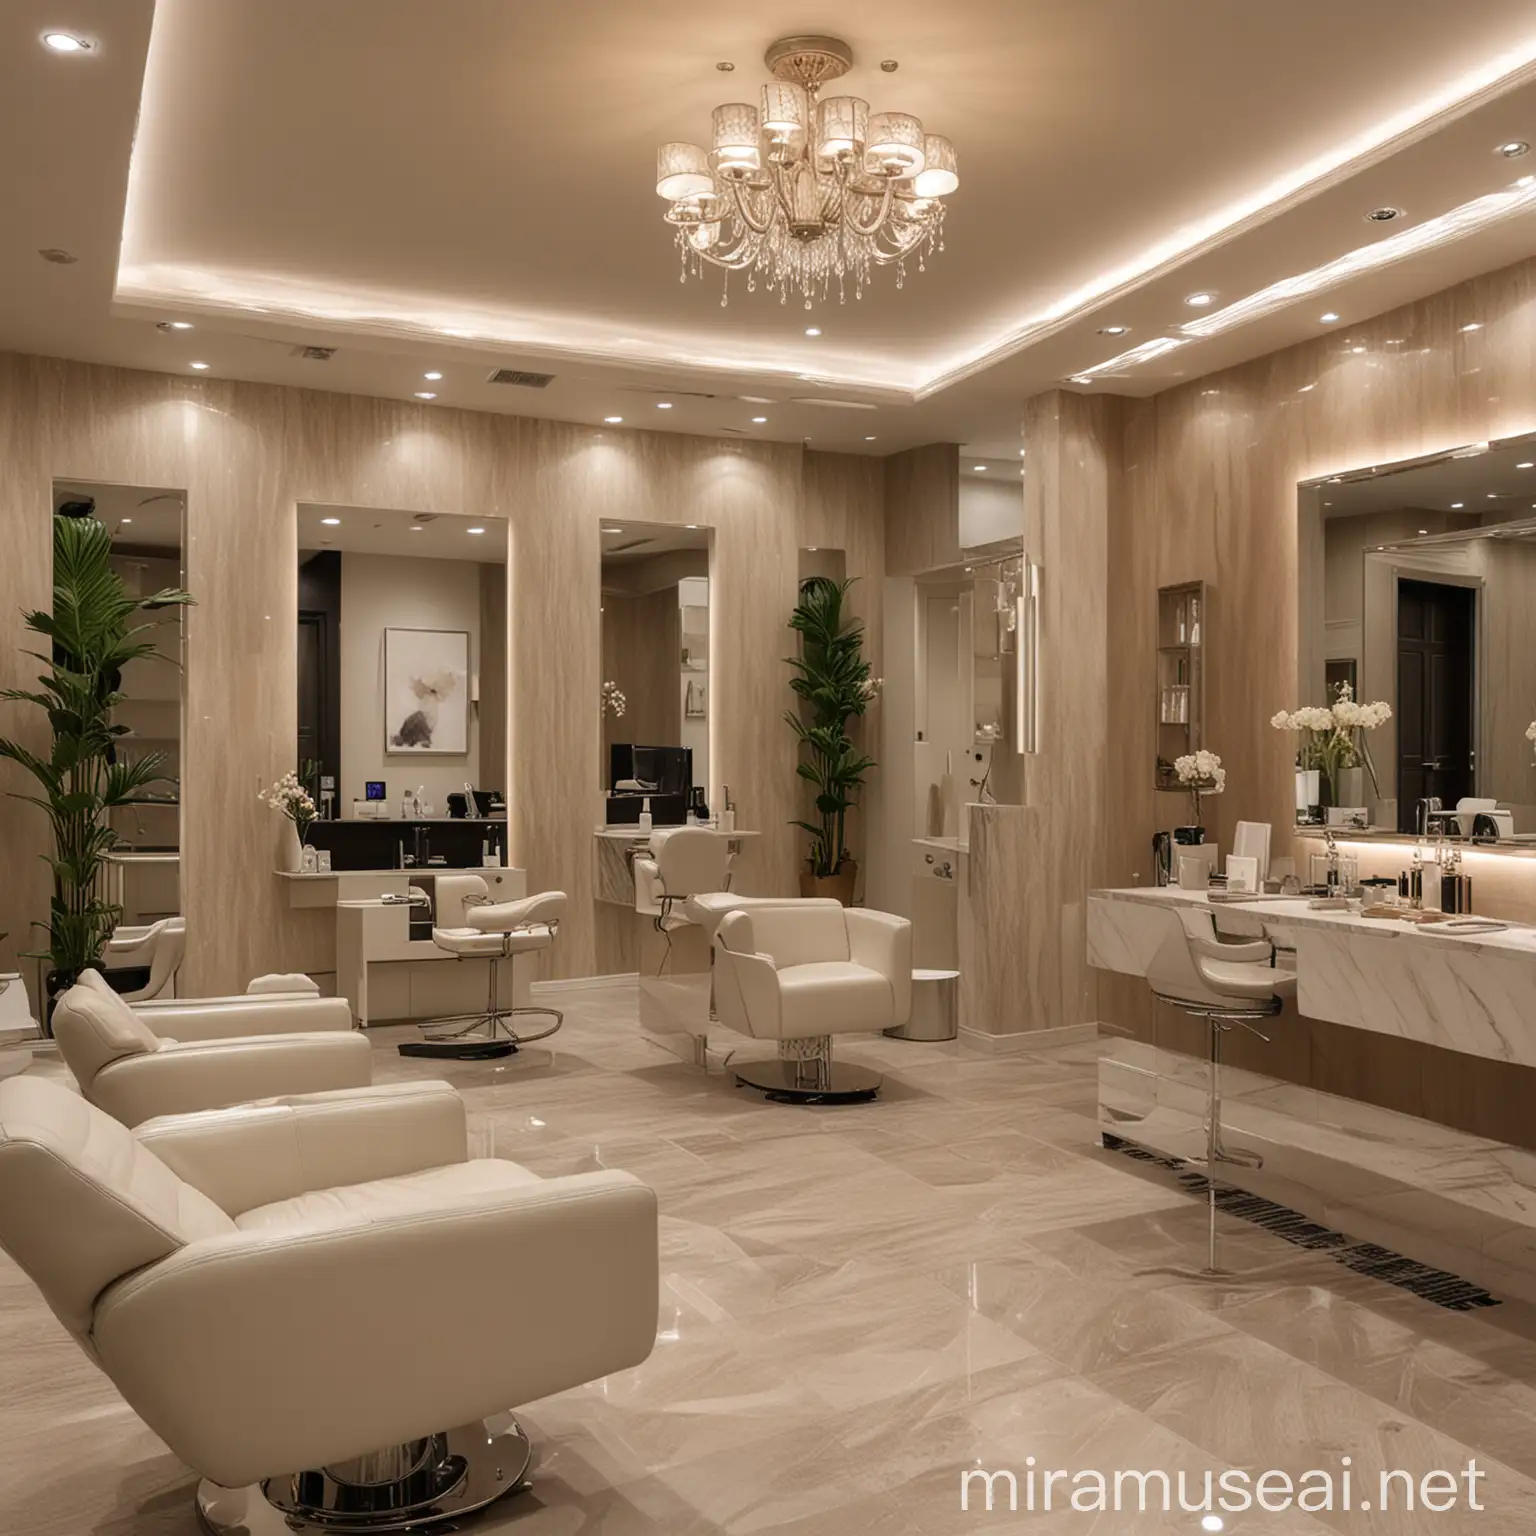 please design a serene and stylish beauty salon within an 800 sqft space. Your client envisions a haven where clients can escape the hustle and bustle of everyday life and indulge in pampering treatments. They want the design to reflect sophistication, tranquility, and modern elegance. From the layout to the color scheme, furniture selection, and lighting design, every element should contribute to creating a welcoming and luxurious ambiance. Consider how to optimize the space to accommodate various services while ensuring comfort and privacy for clients. Let your creativity flow as you design the interior of this beauty